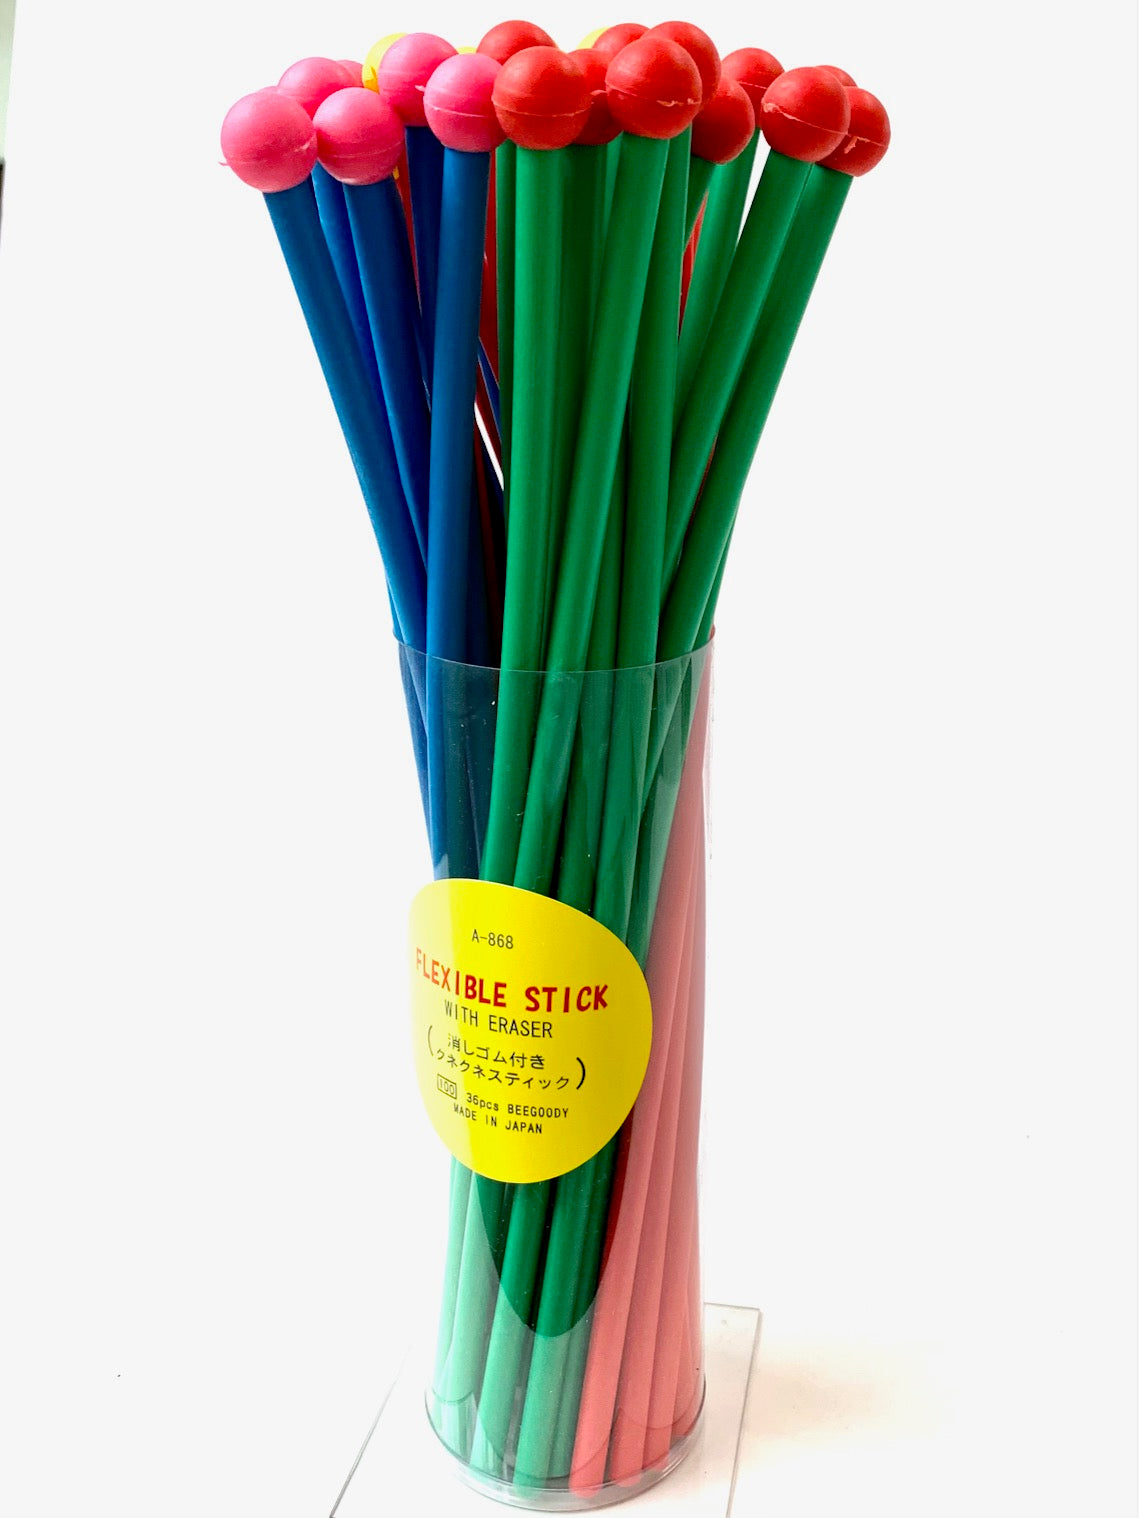 Long Flexible Straw - Discontinued